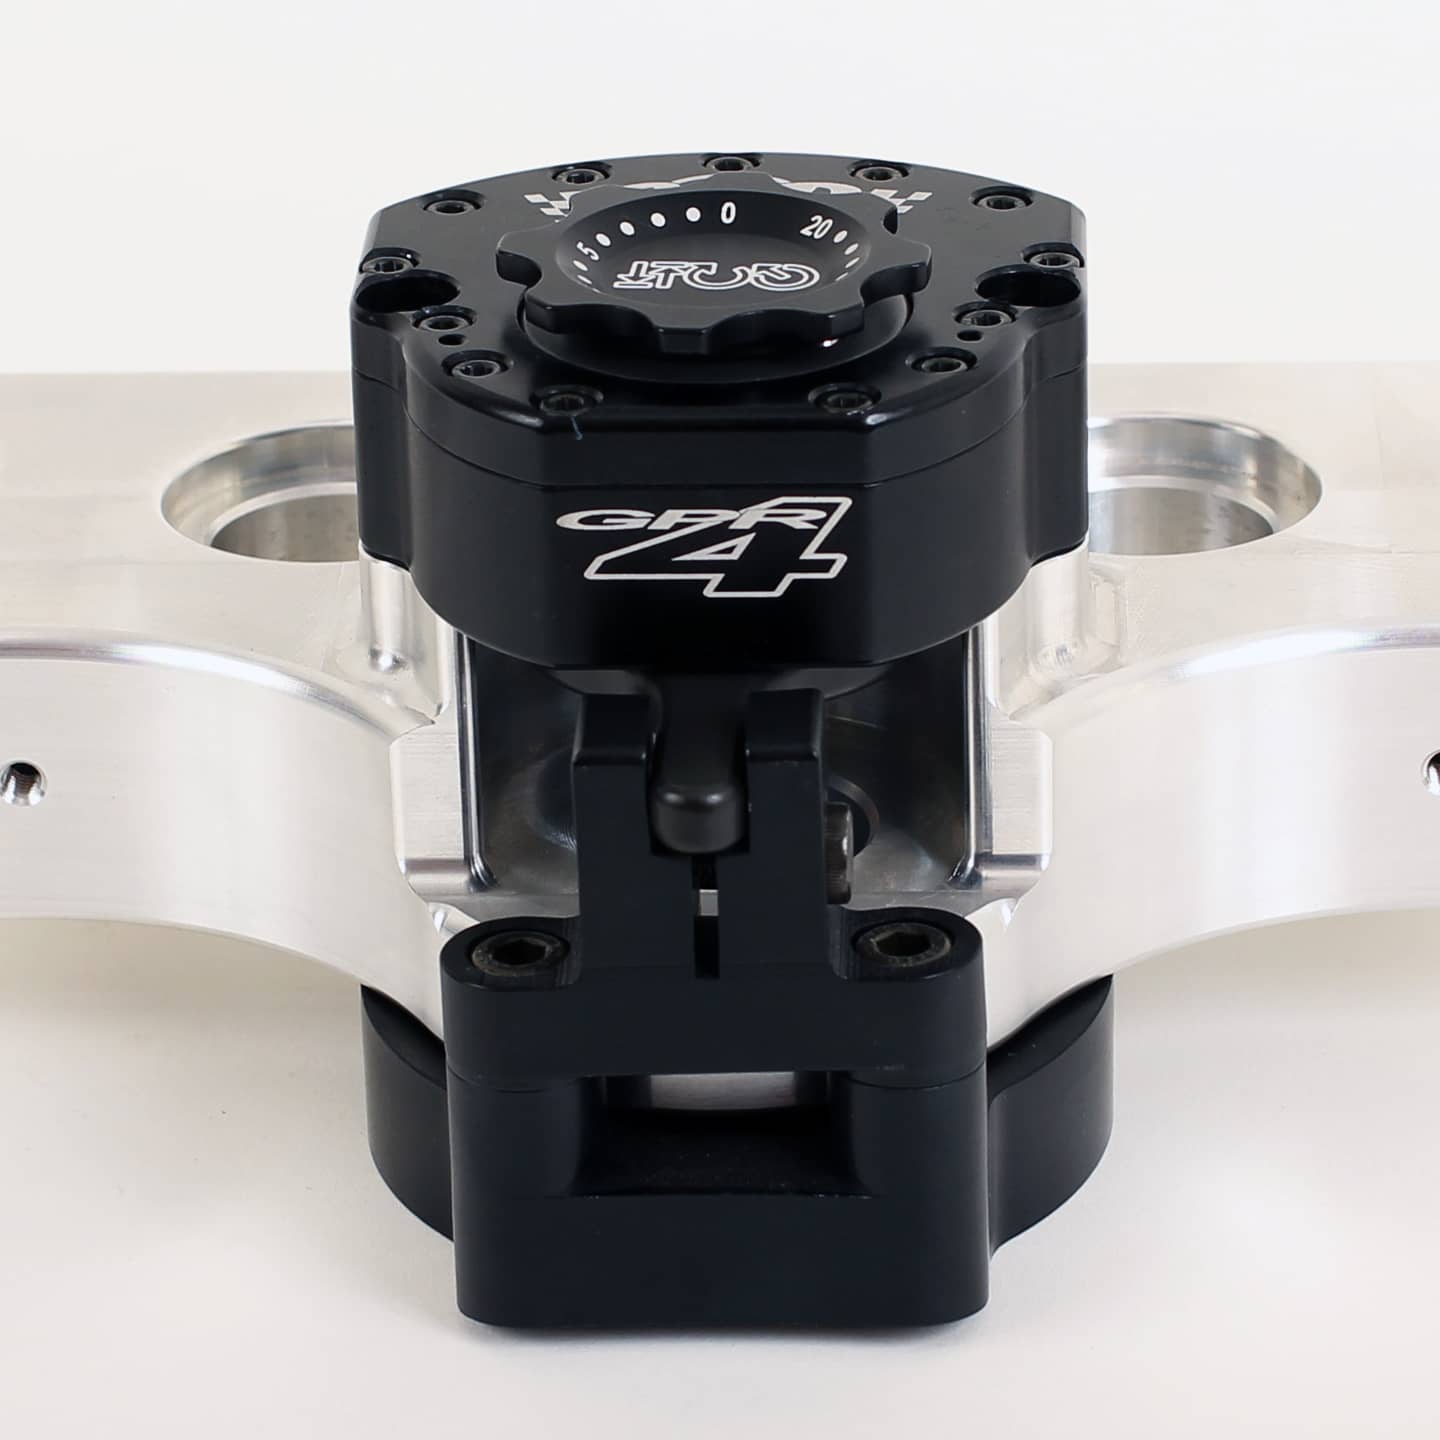 GPR Stabilizer for M8 Softail | Imzz Elite | Motorcycle Parts Store for  Dyna, Bagger, Softail  FXR